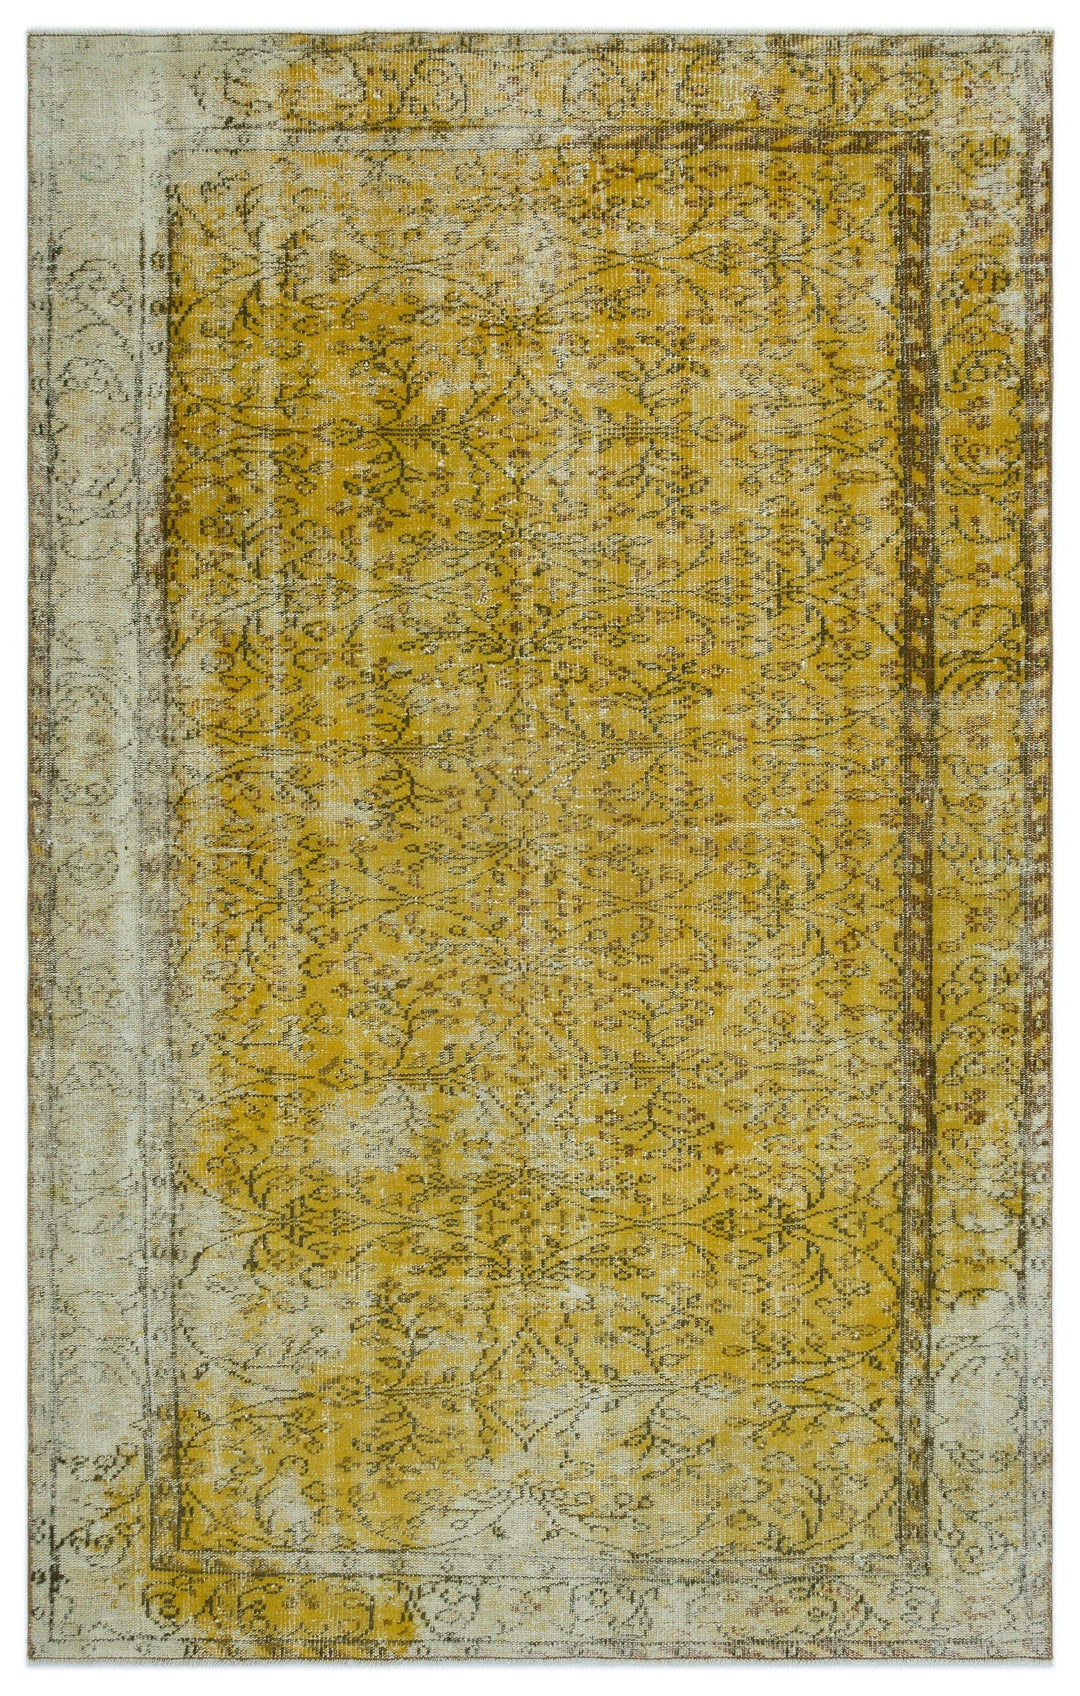 Athens Yellow Tumbled Wool Hand Woven Carpet 166 x 262